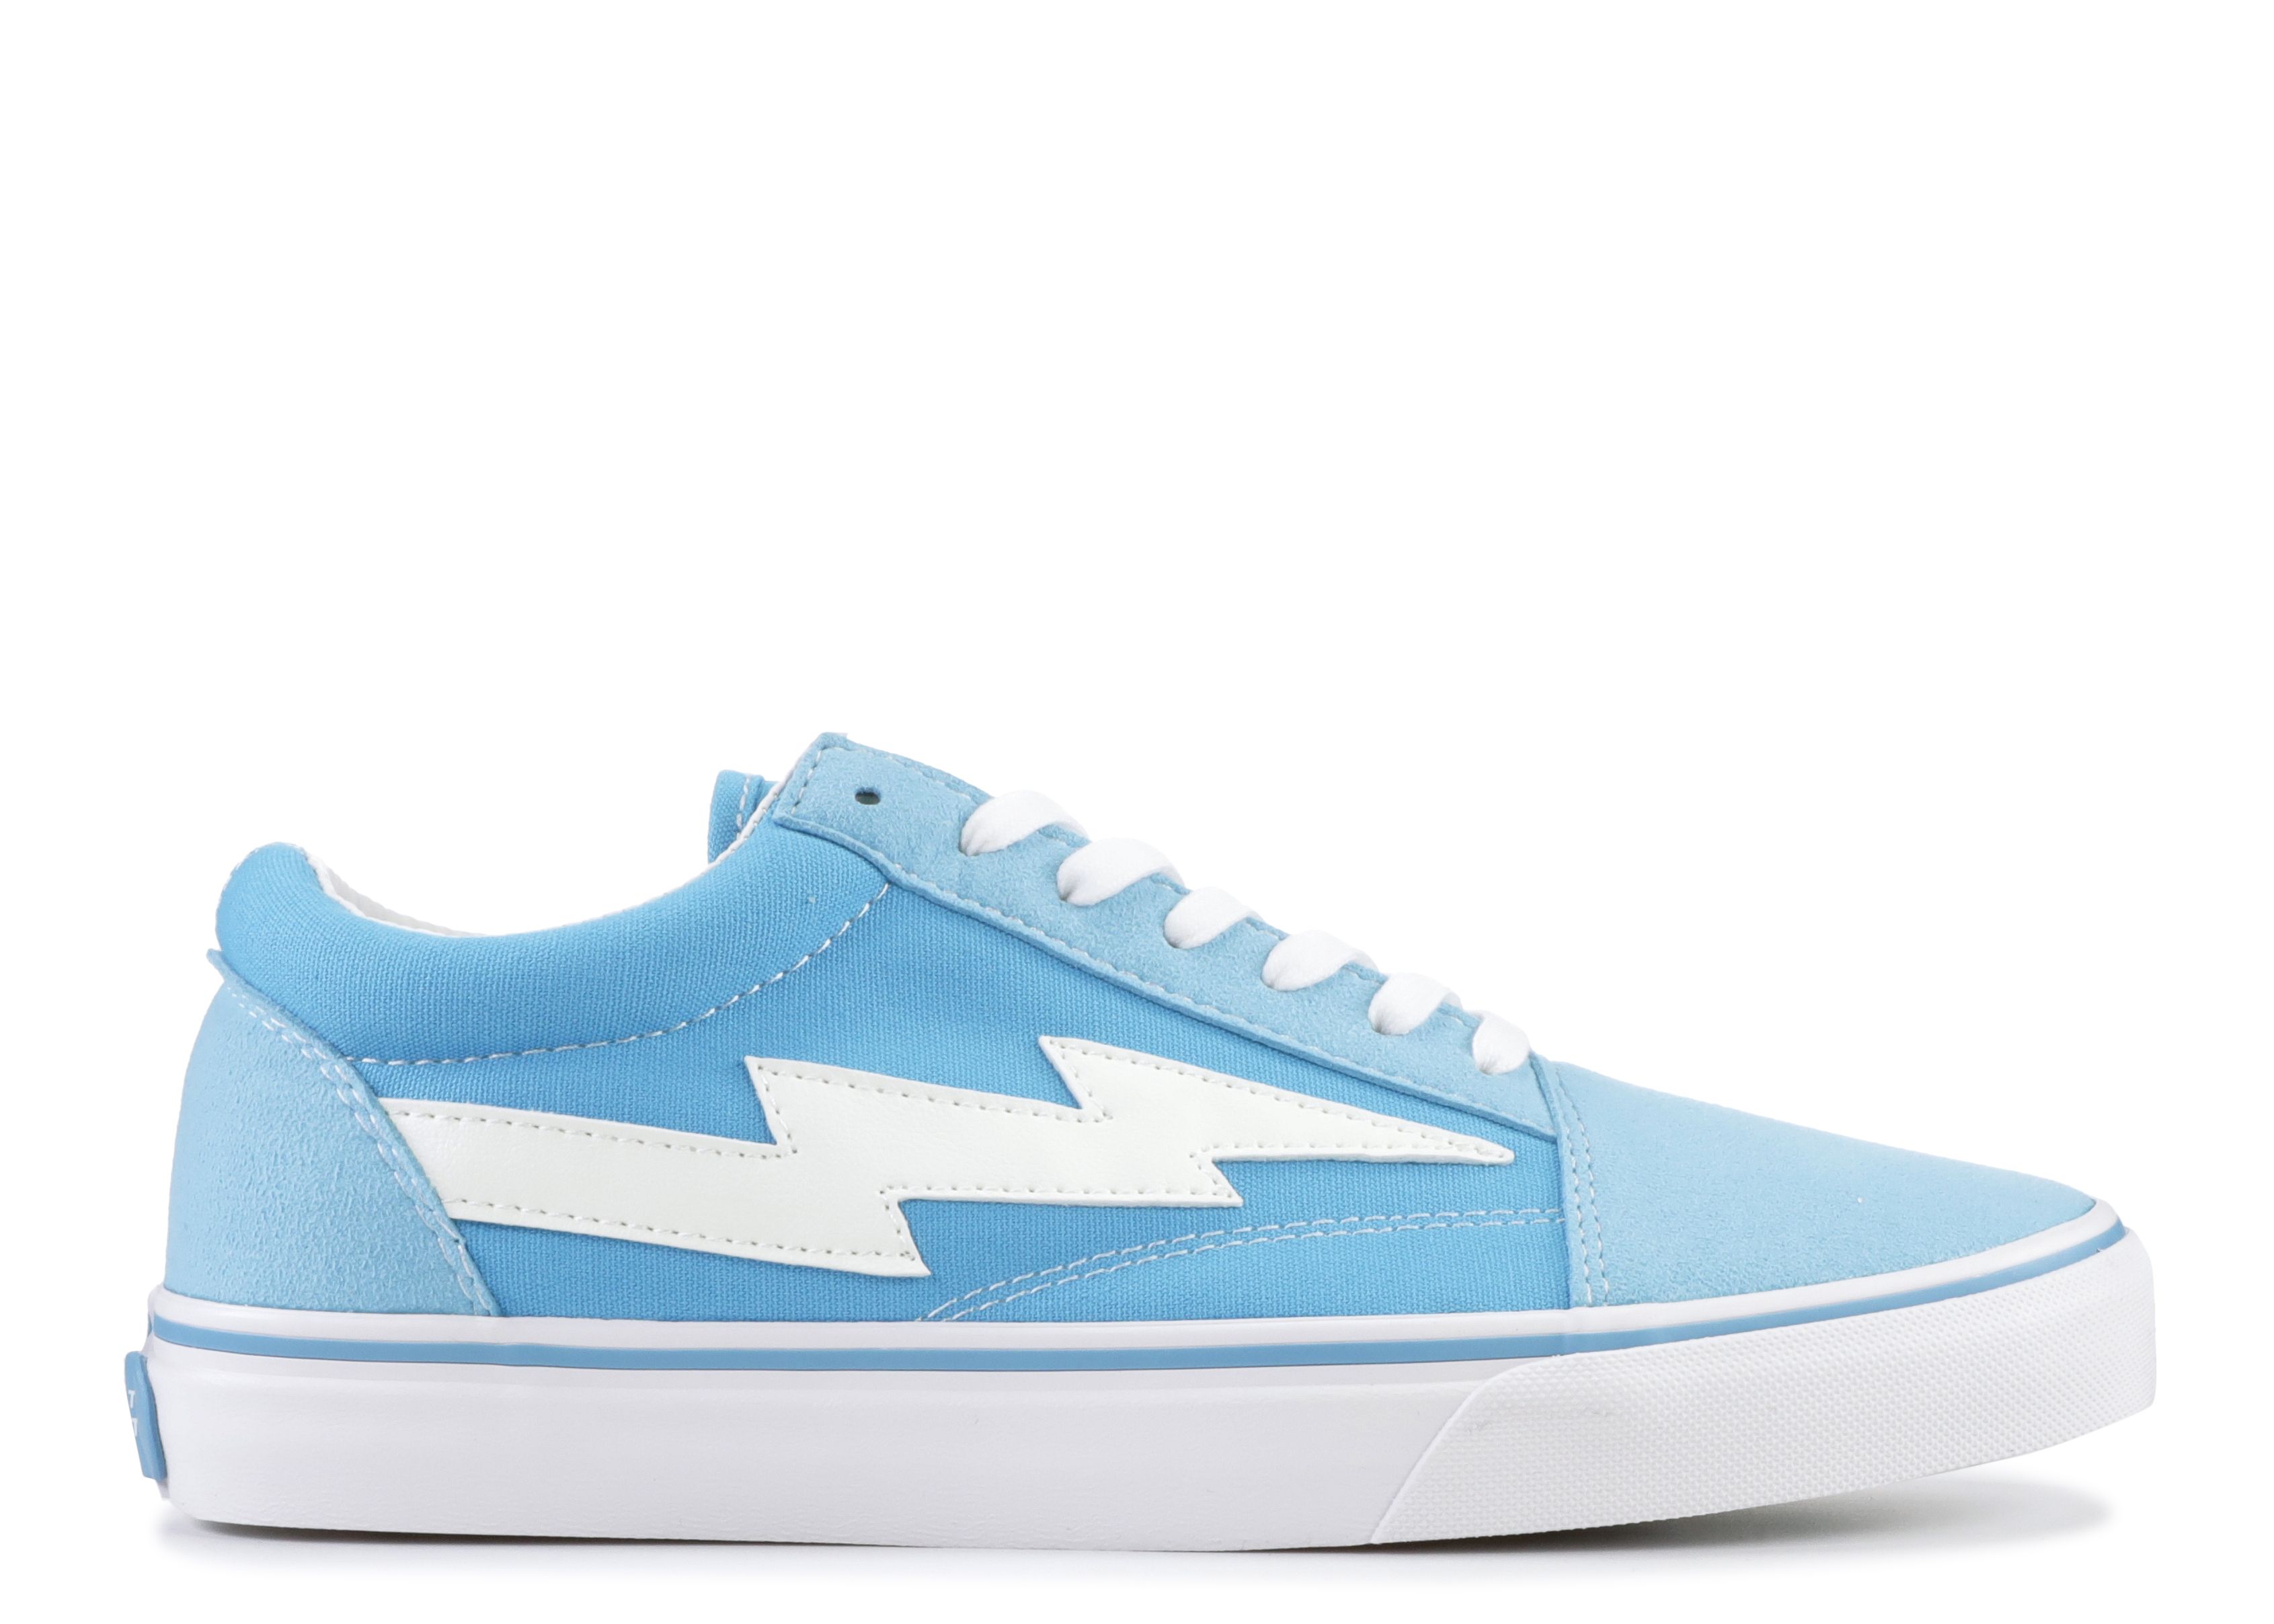 Purchase > vans x revenge x storm, Up to 72% OFF